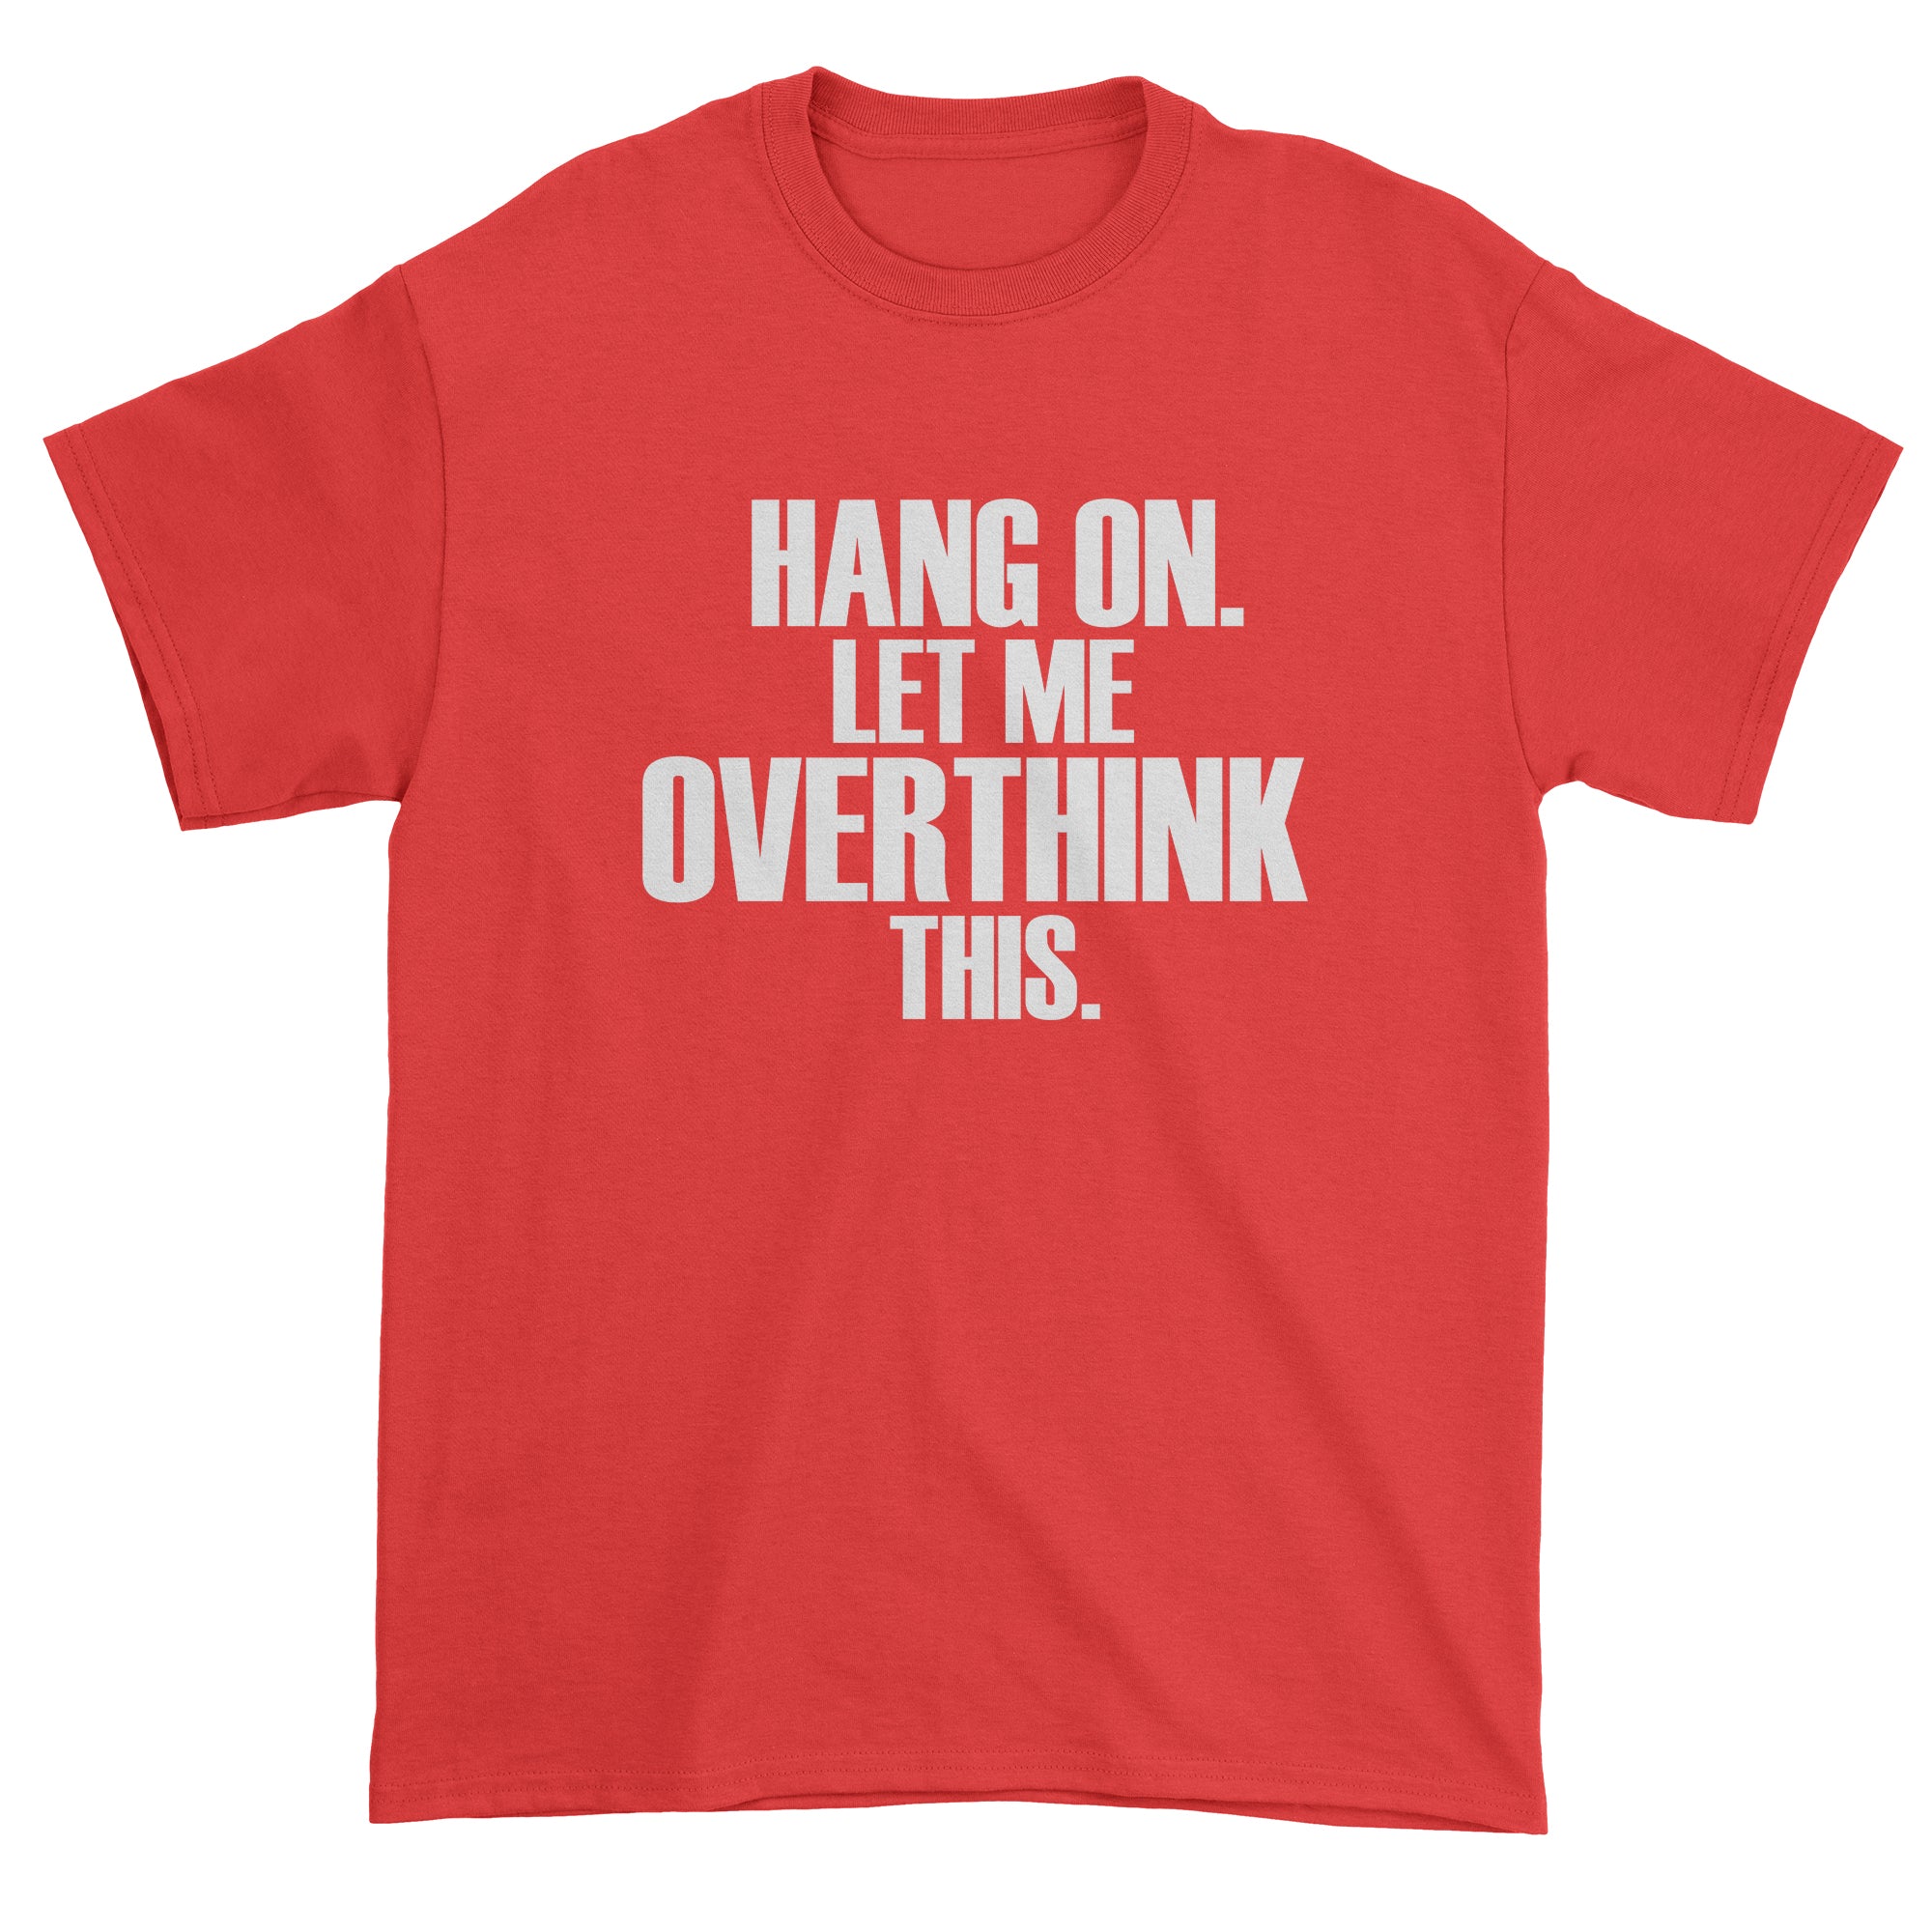 Hold on let me overthink this funny Men's T-Shirt